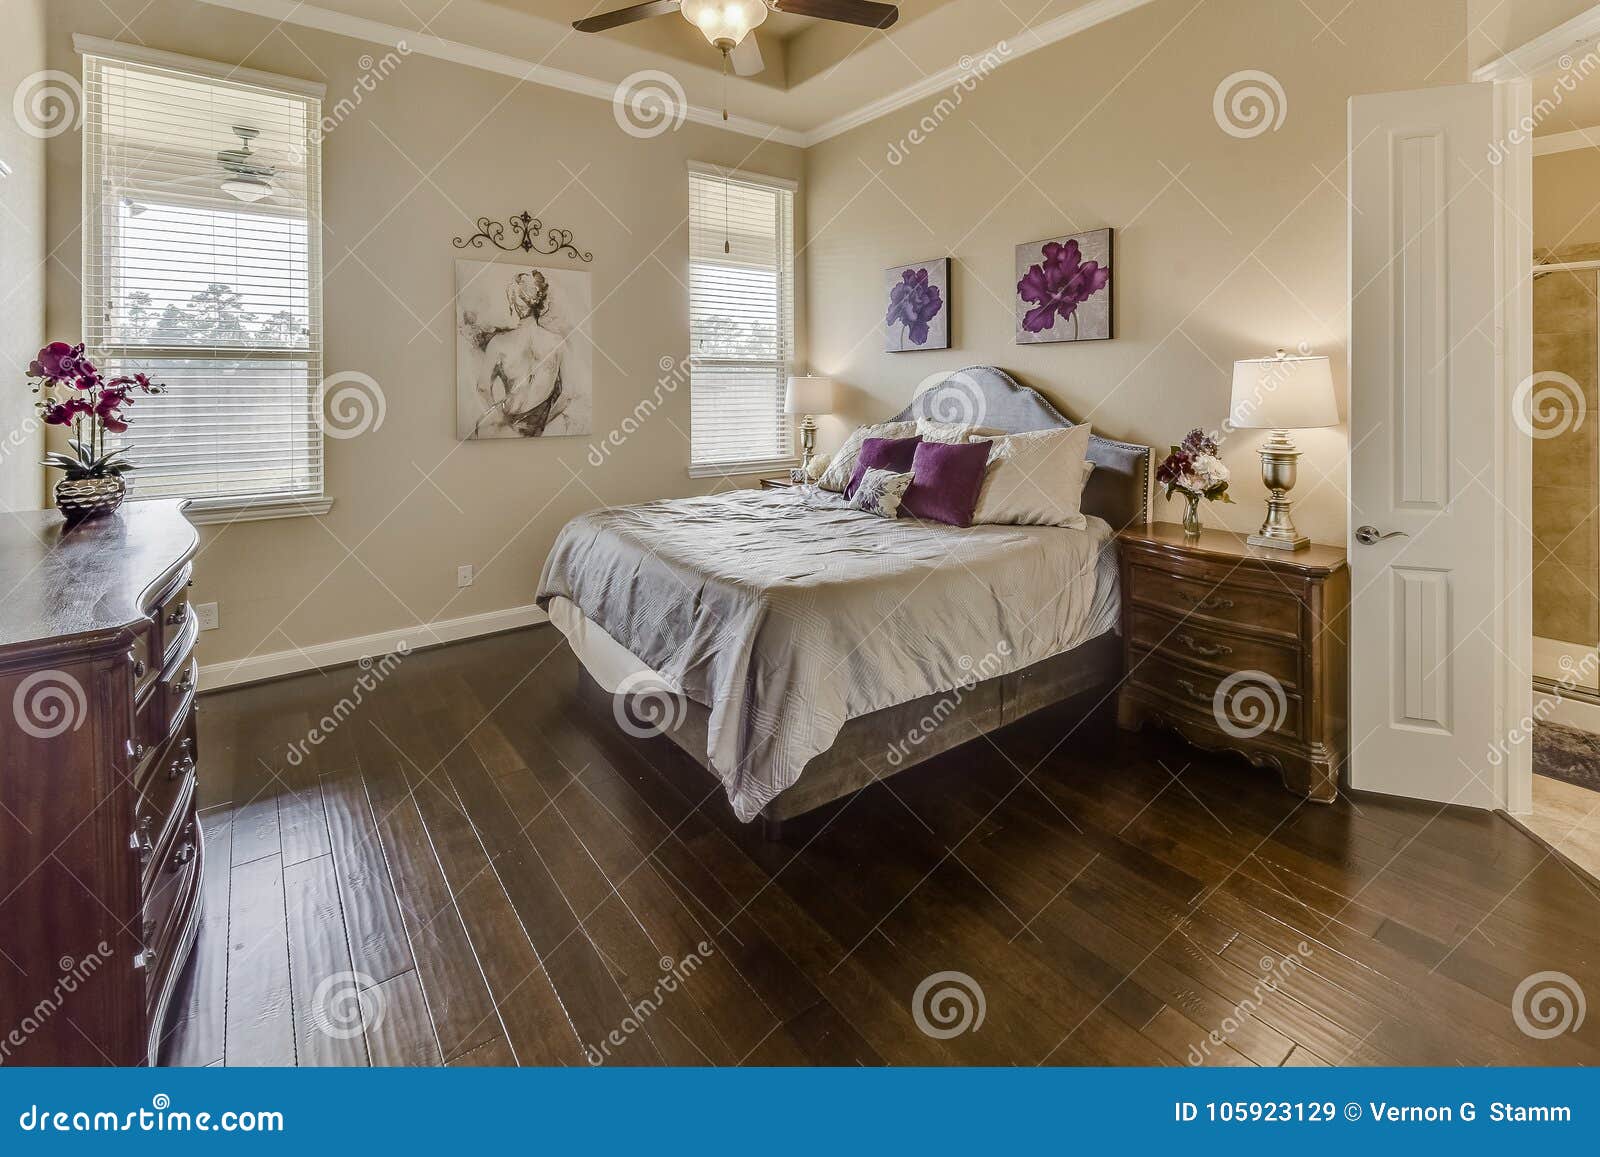 Nice And Sunny Master Bedroom Stock Image Image Of Ceiling